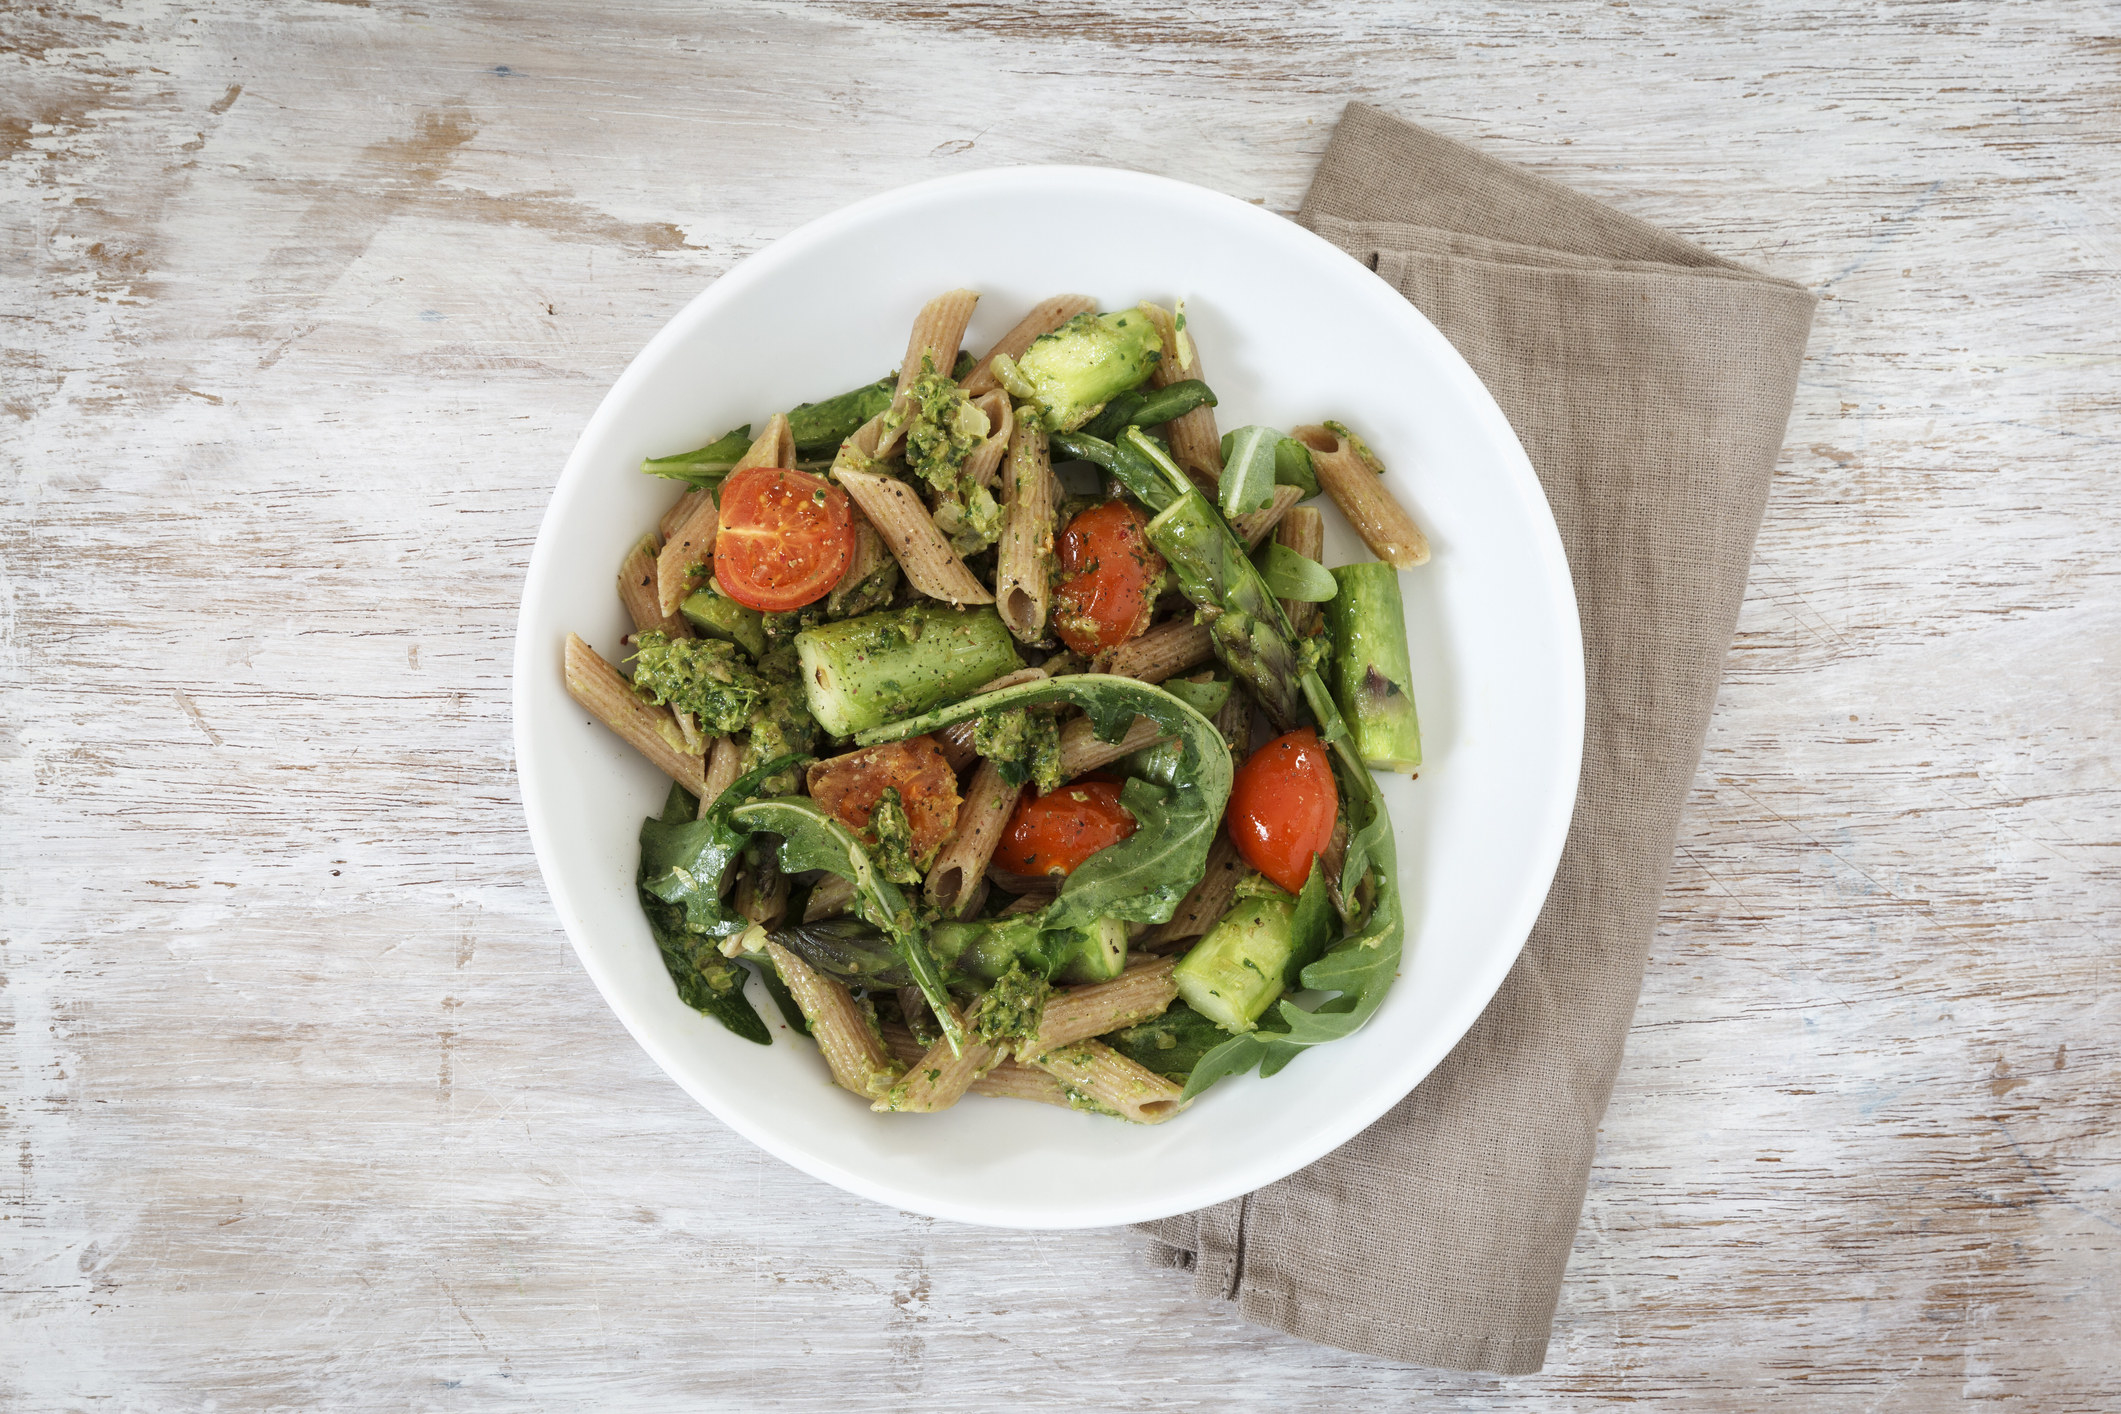 Pasta with lots of vegetables in a bowl